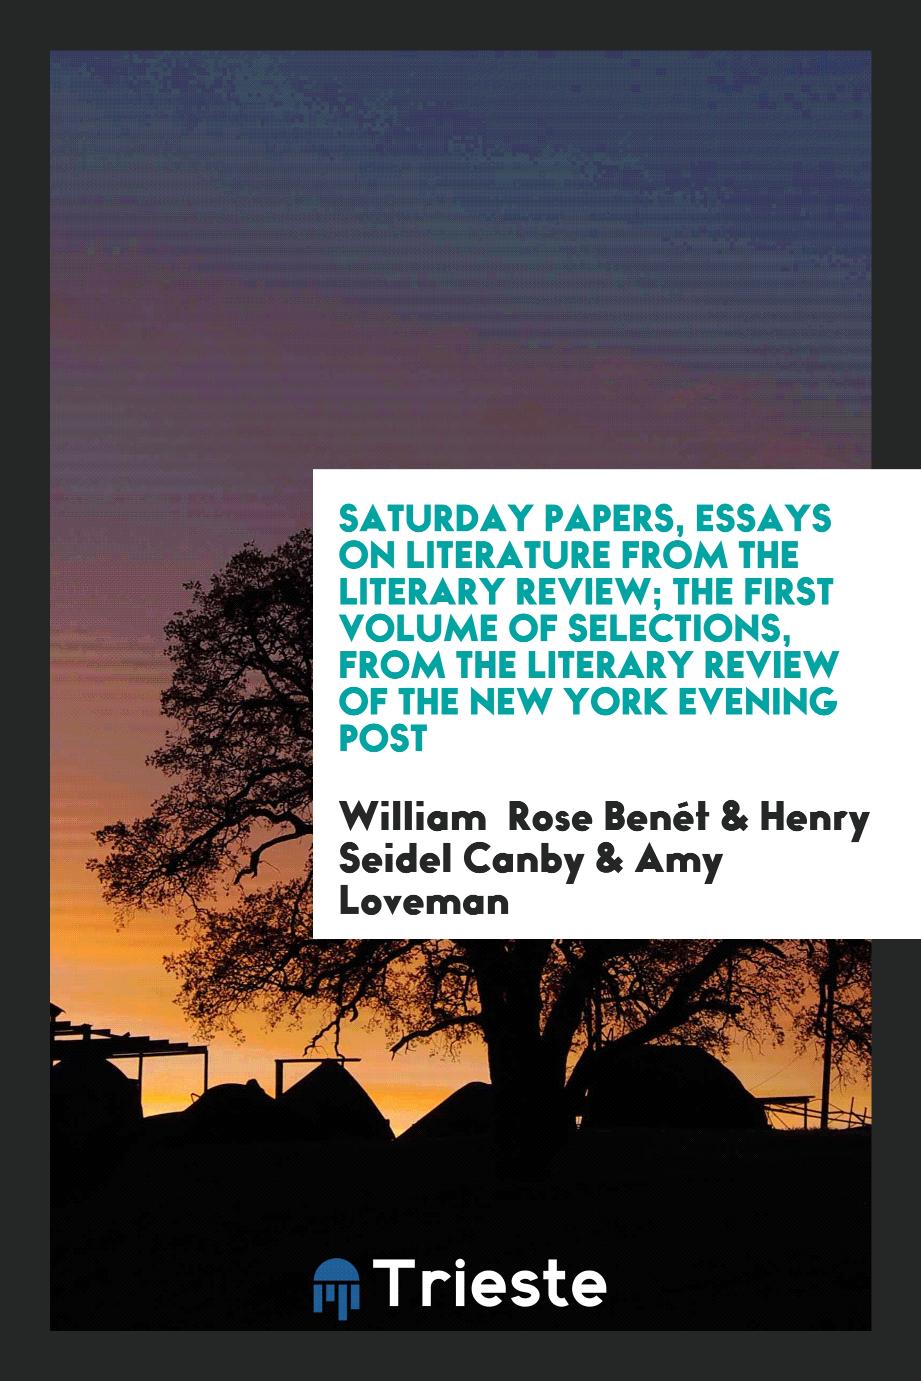 Saturday Papers, Essays on Literature from the Literary Review; The First Volume of Selections, from The Literary Review of The New York Evening Post